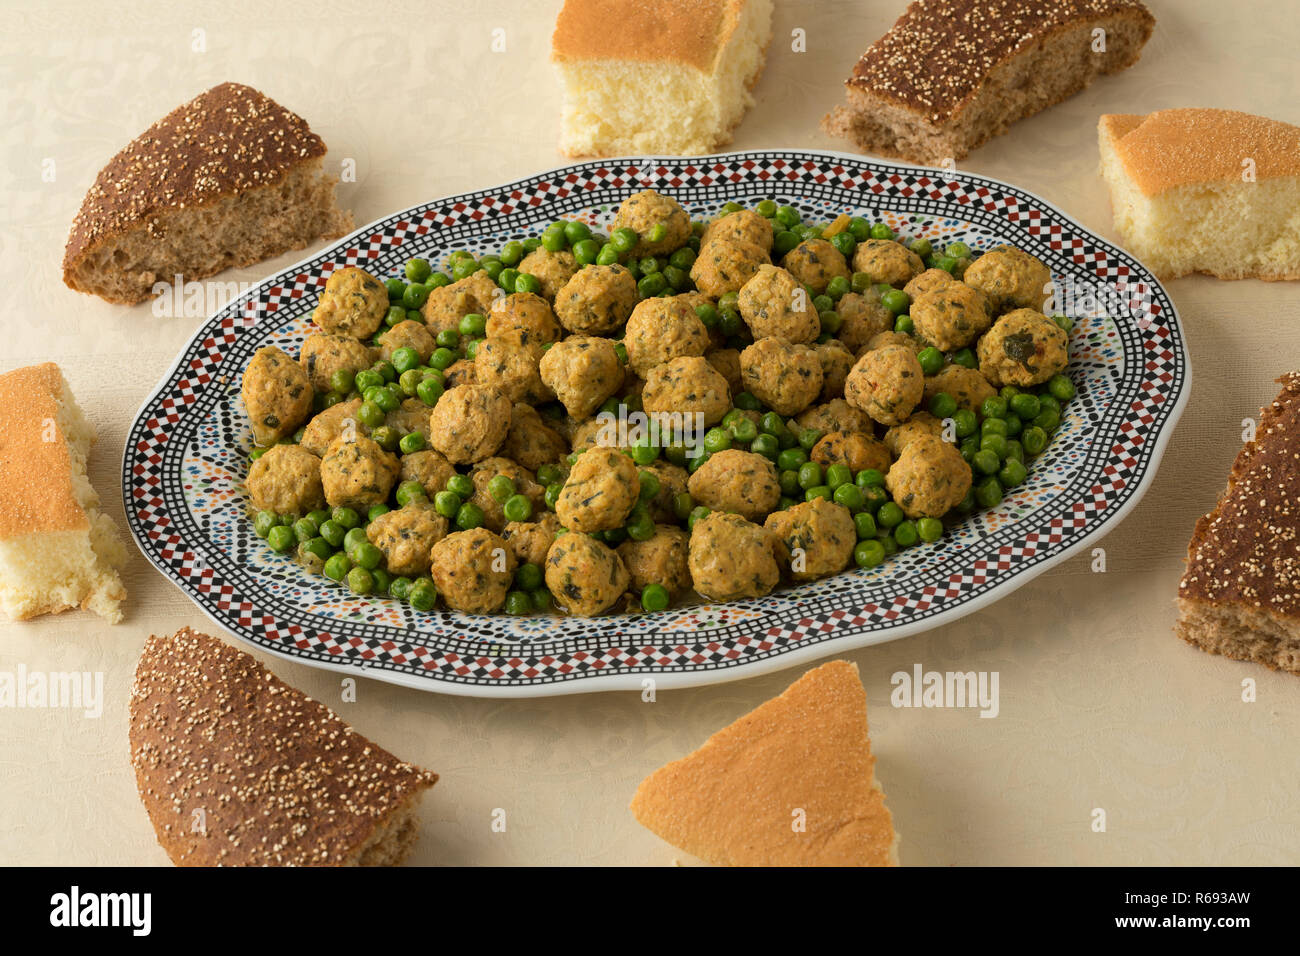 Moroccan style minced chicken balls, green peas   and bread for dinner Stock Photo